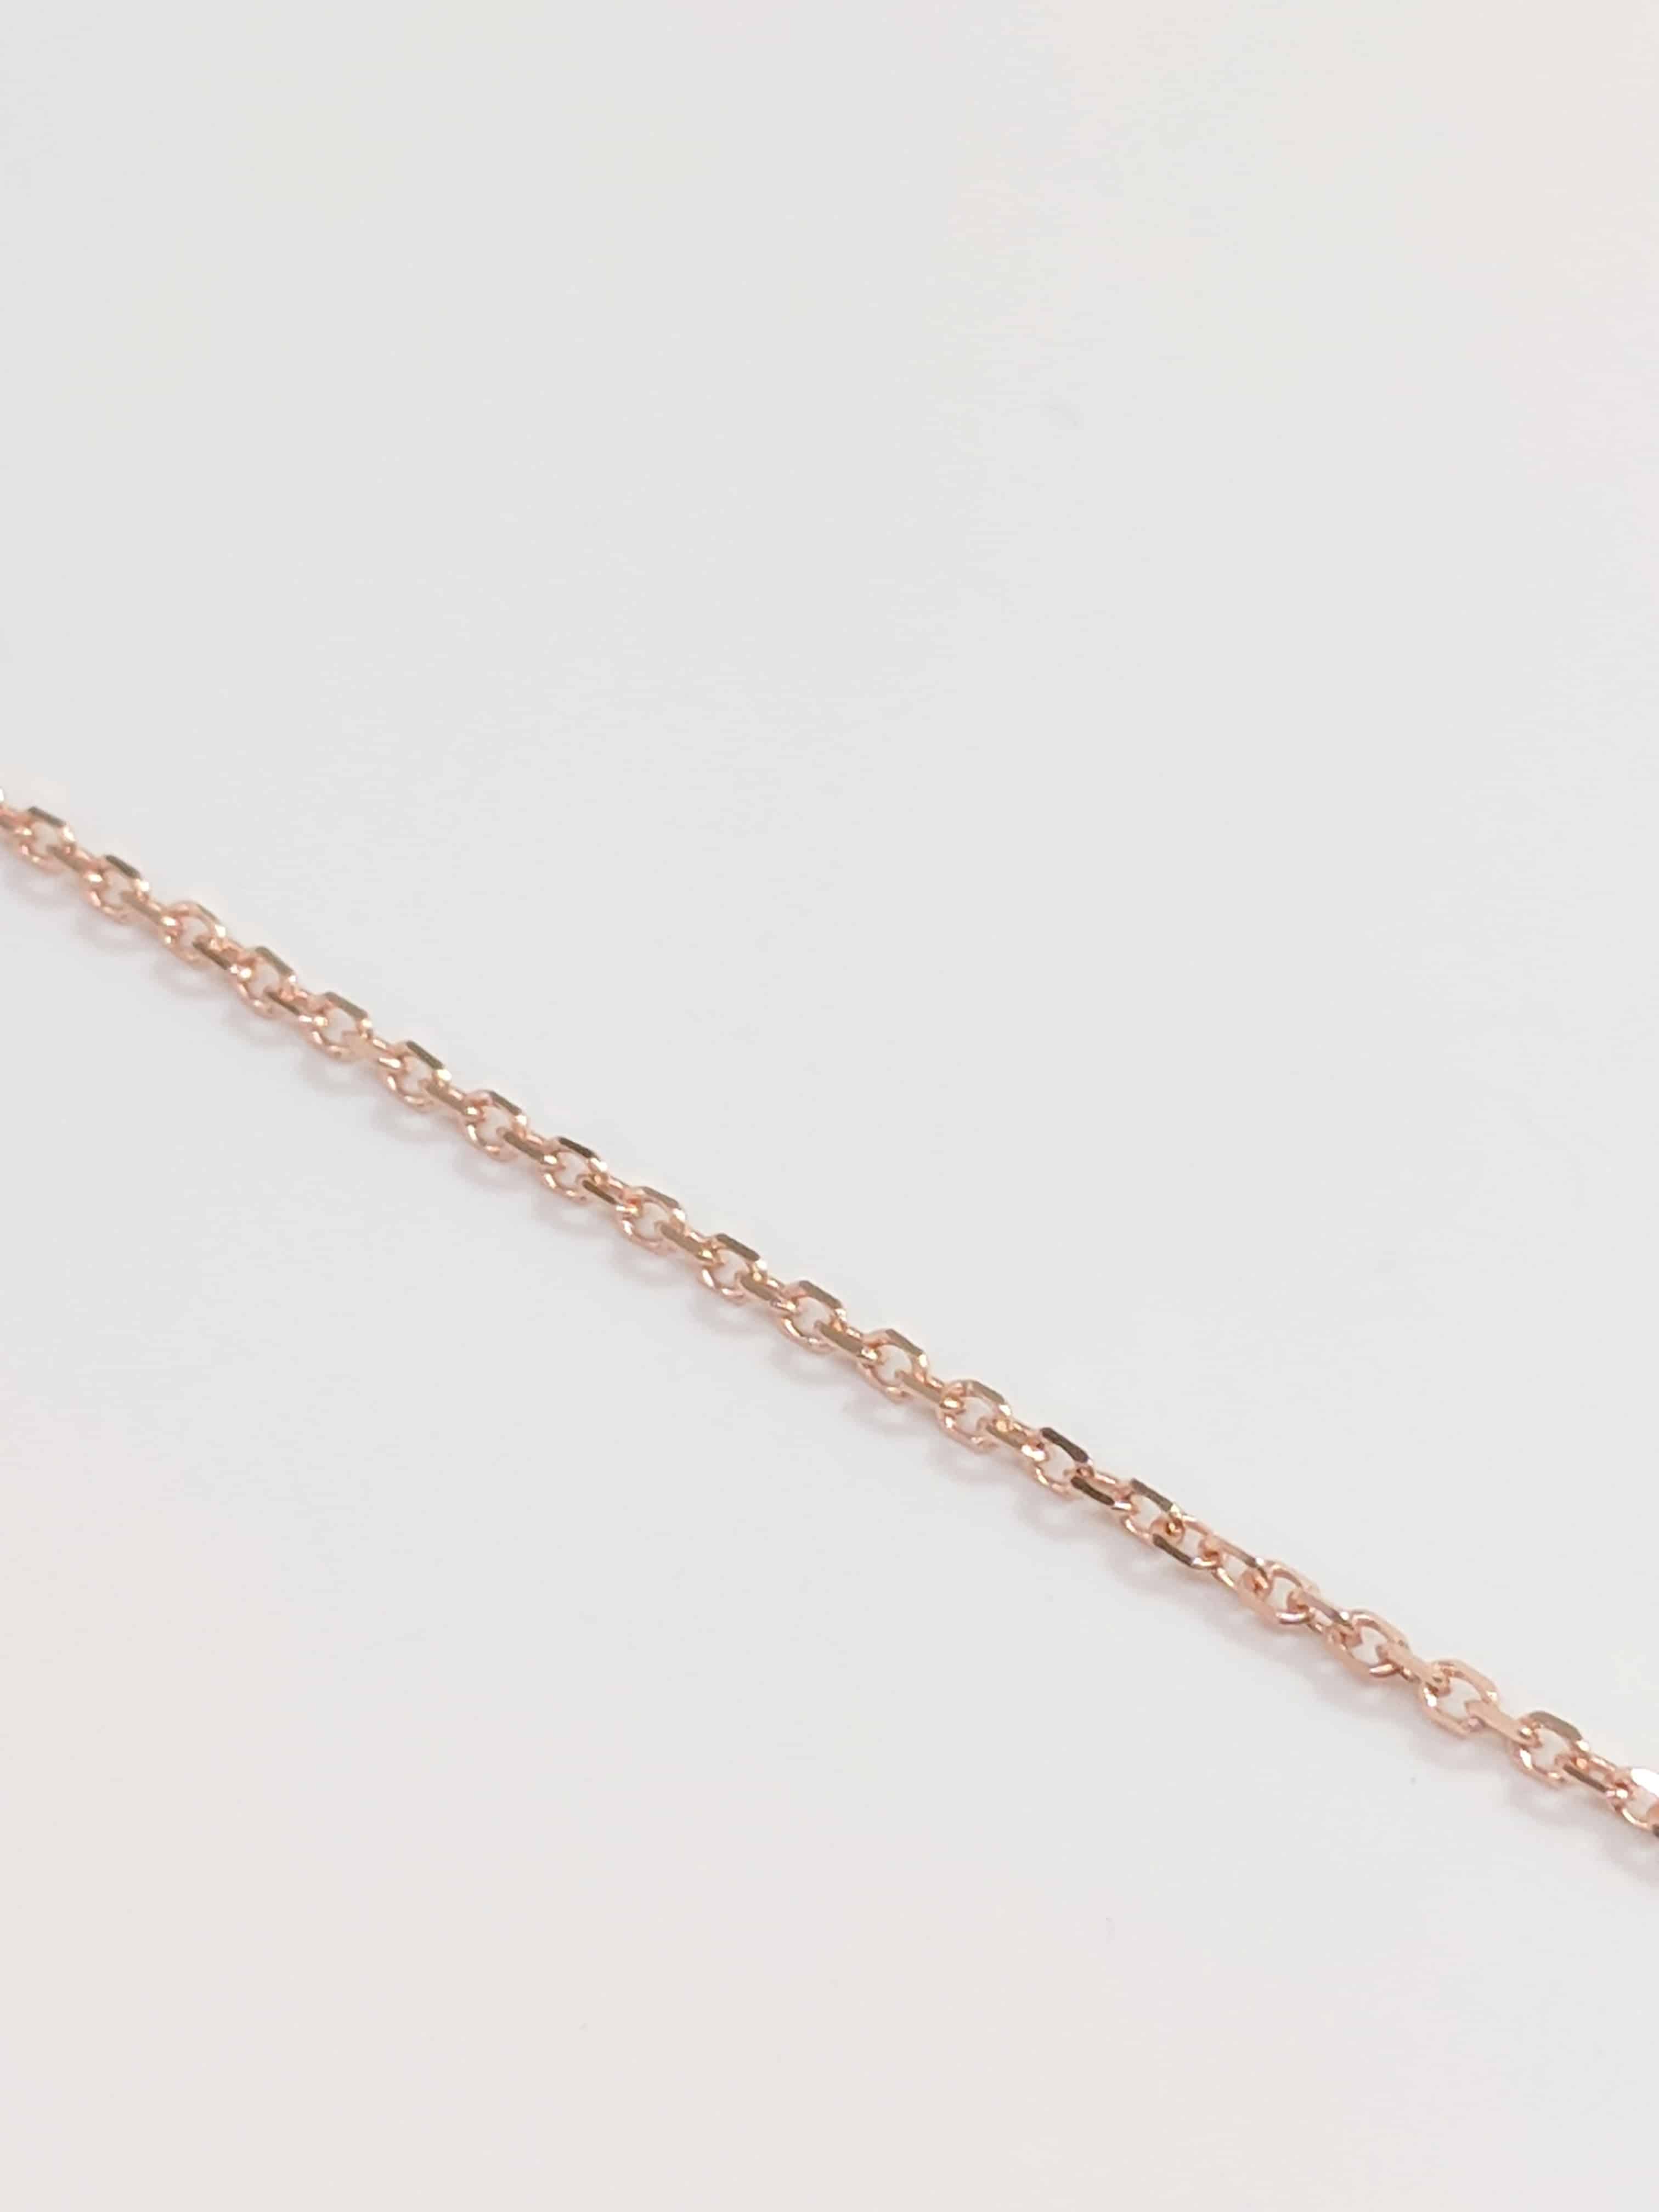 14KT Rose gold cable chain necklace link